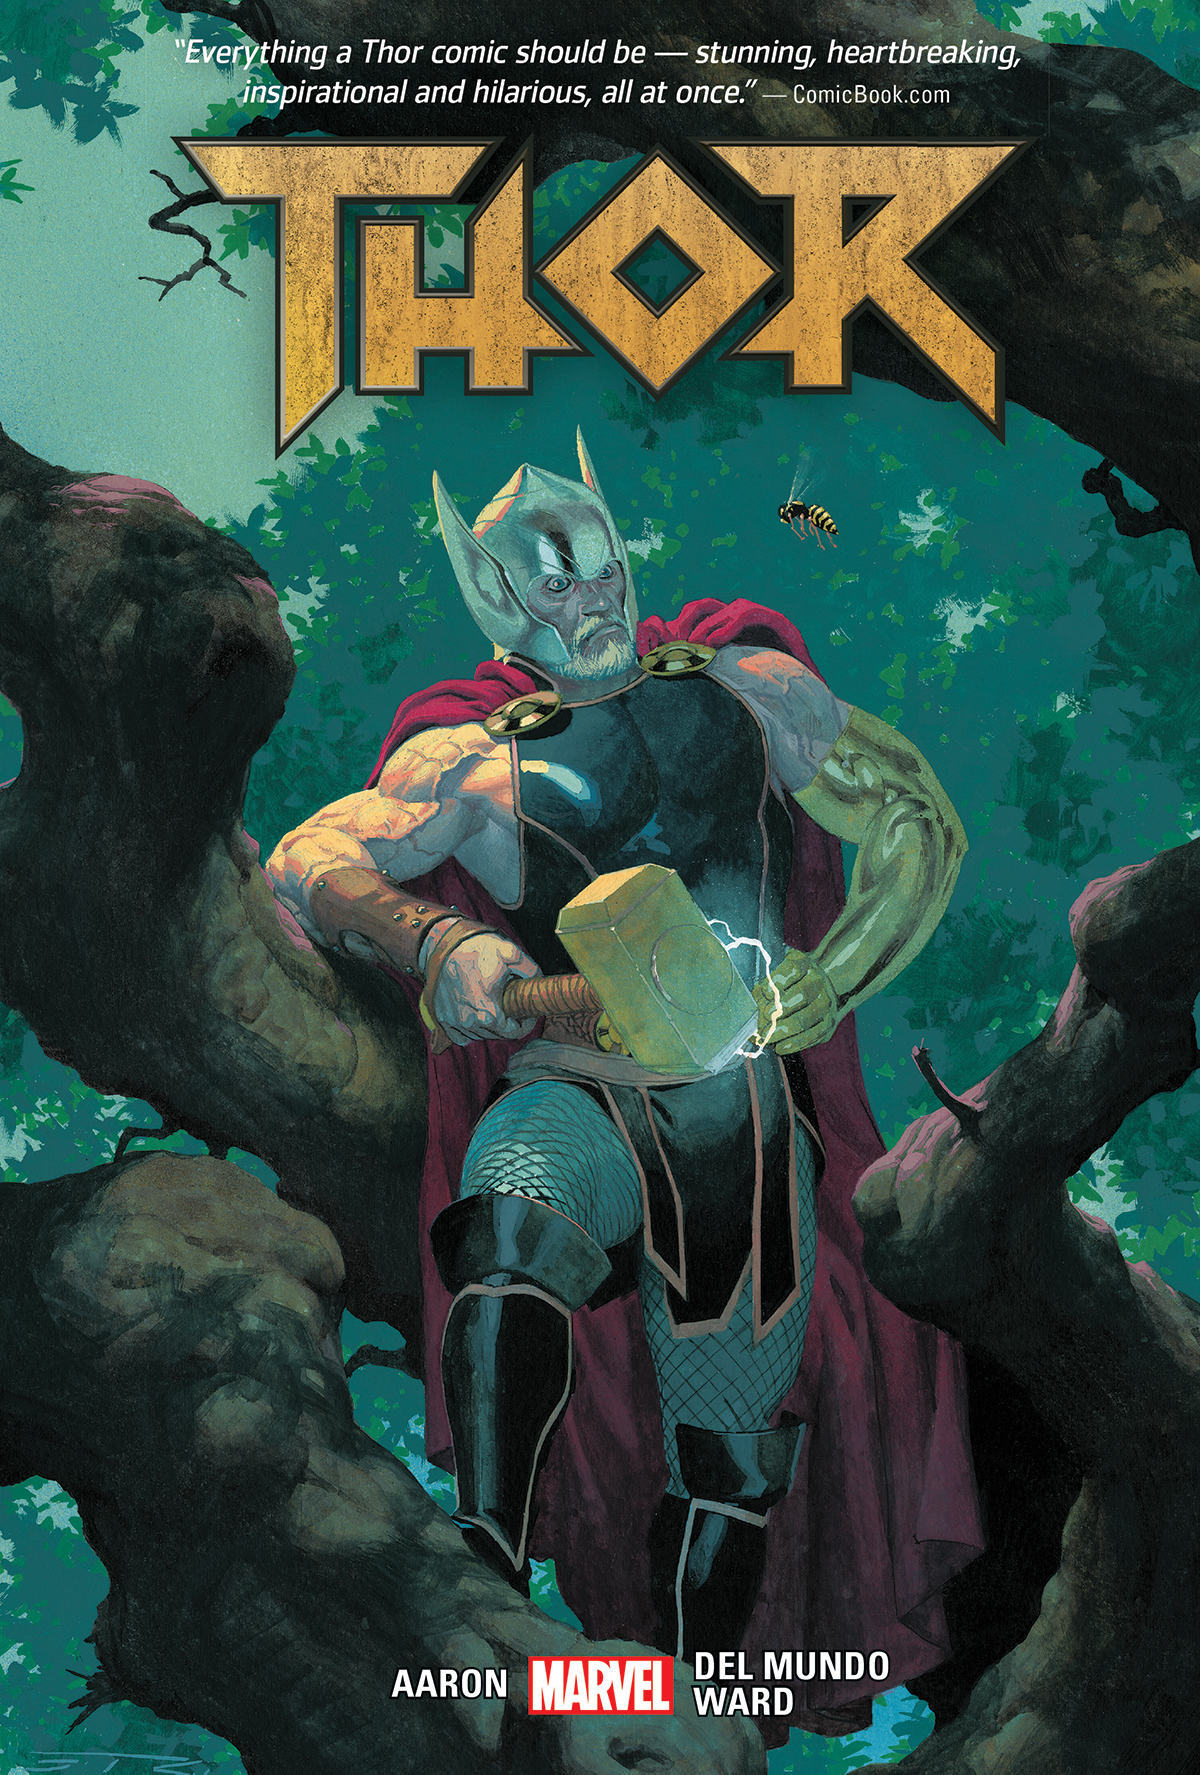 Thor by Jason Aaron Vol. 4 (Hardcover)